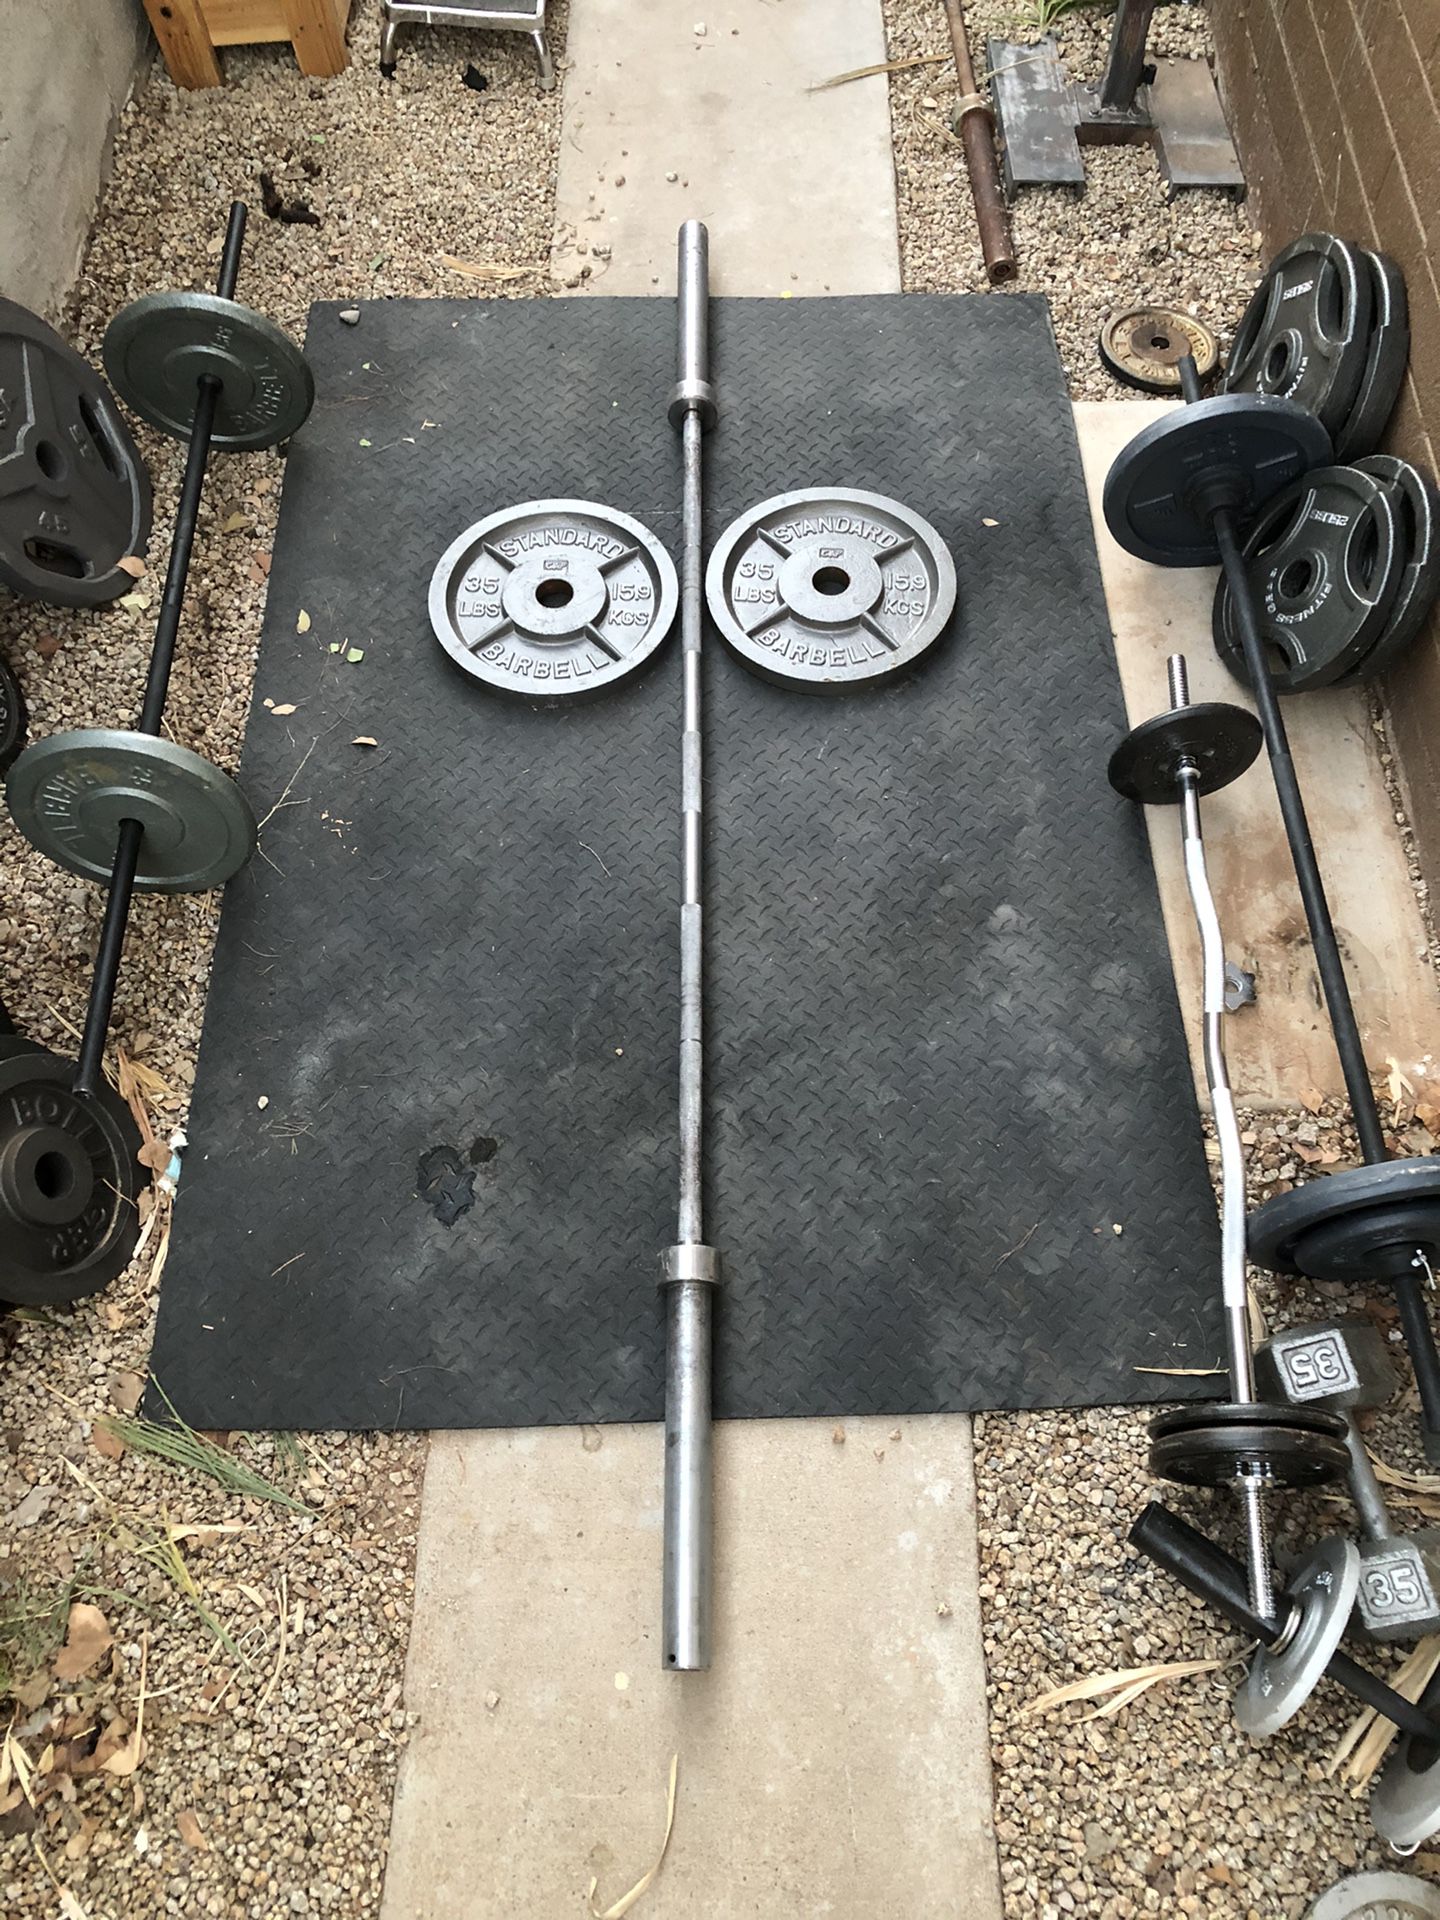 7 foot Olympic Bar / barbell and weight plates...$225 OBO